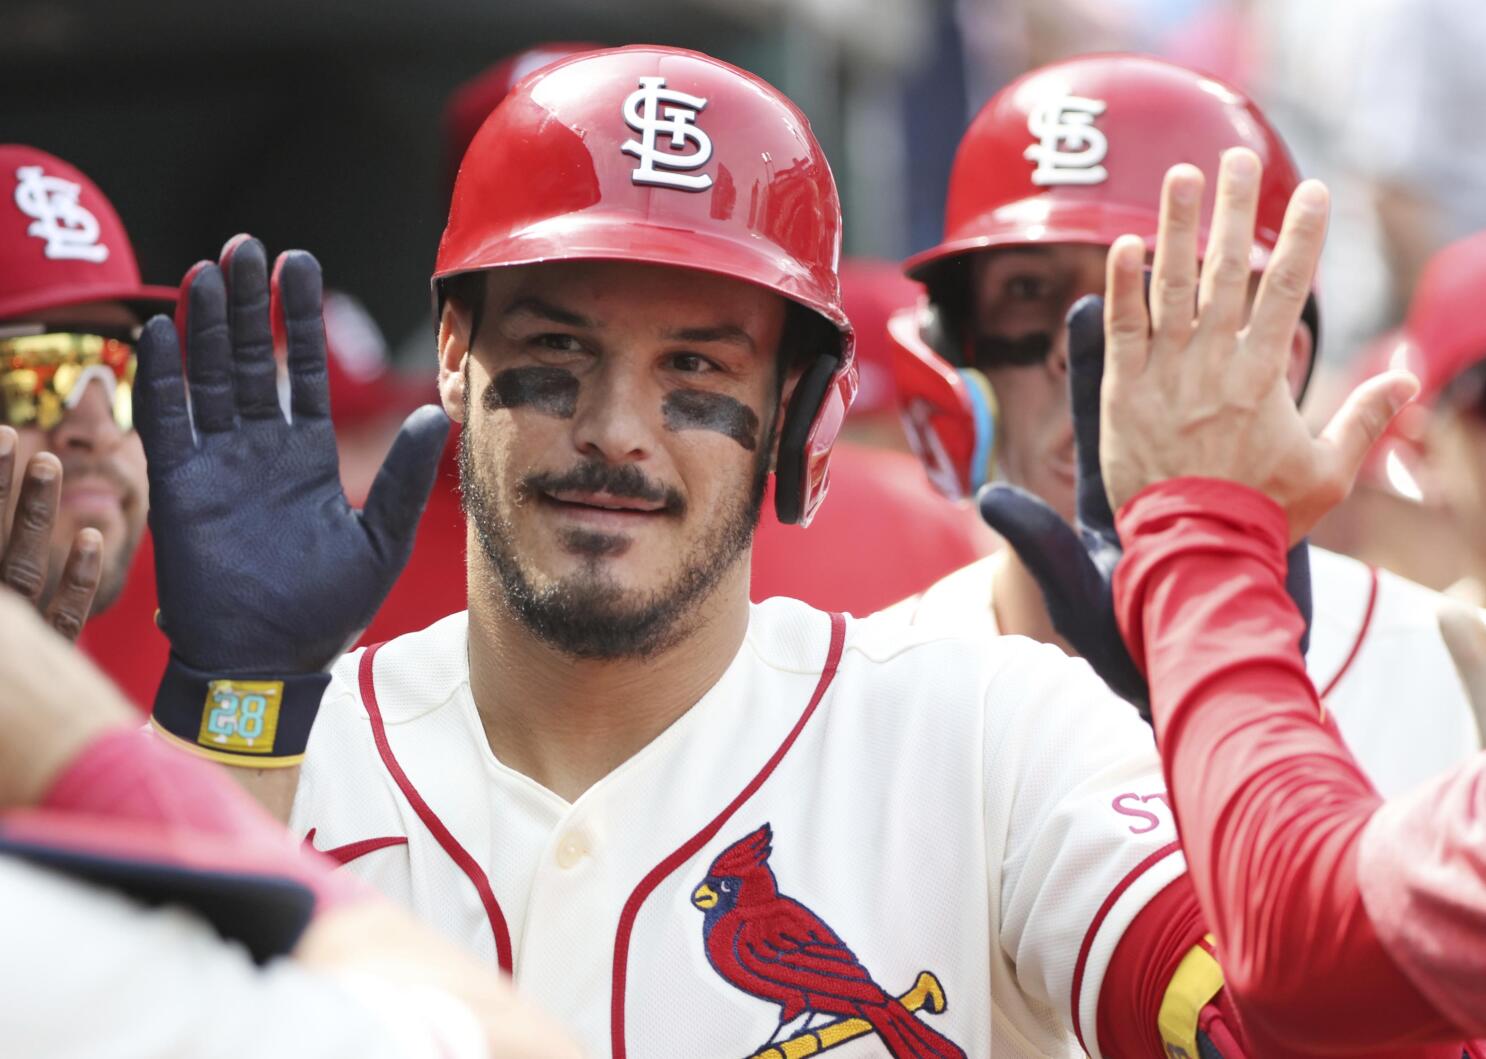 Not content with 15 straight wins, St. Louis Cardinals have